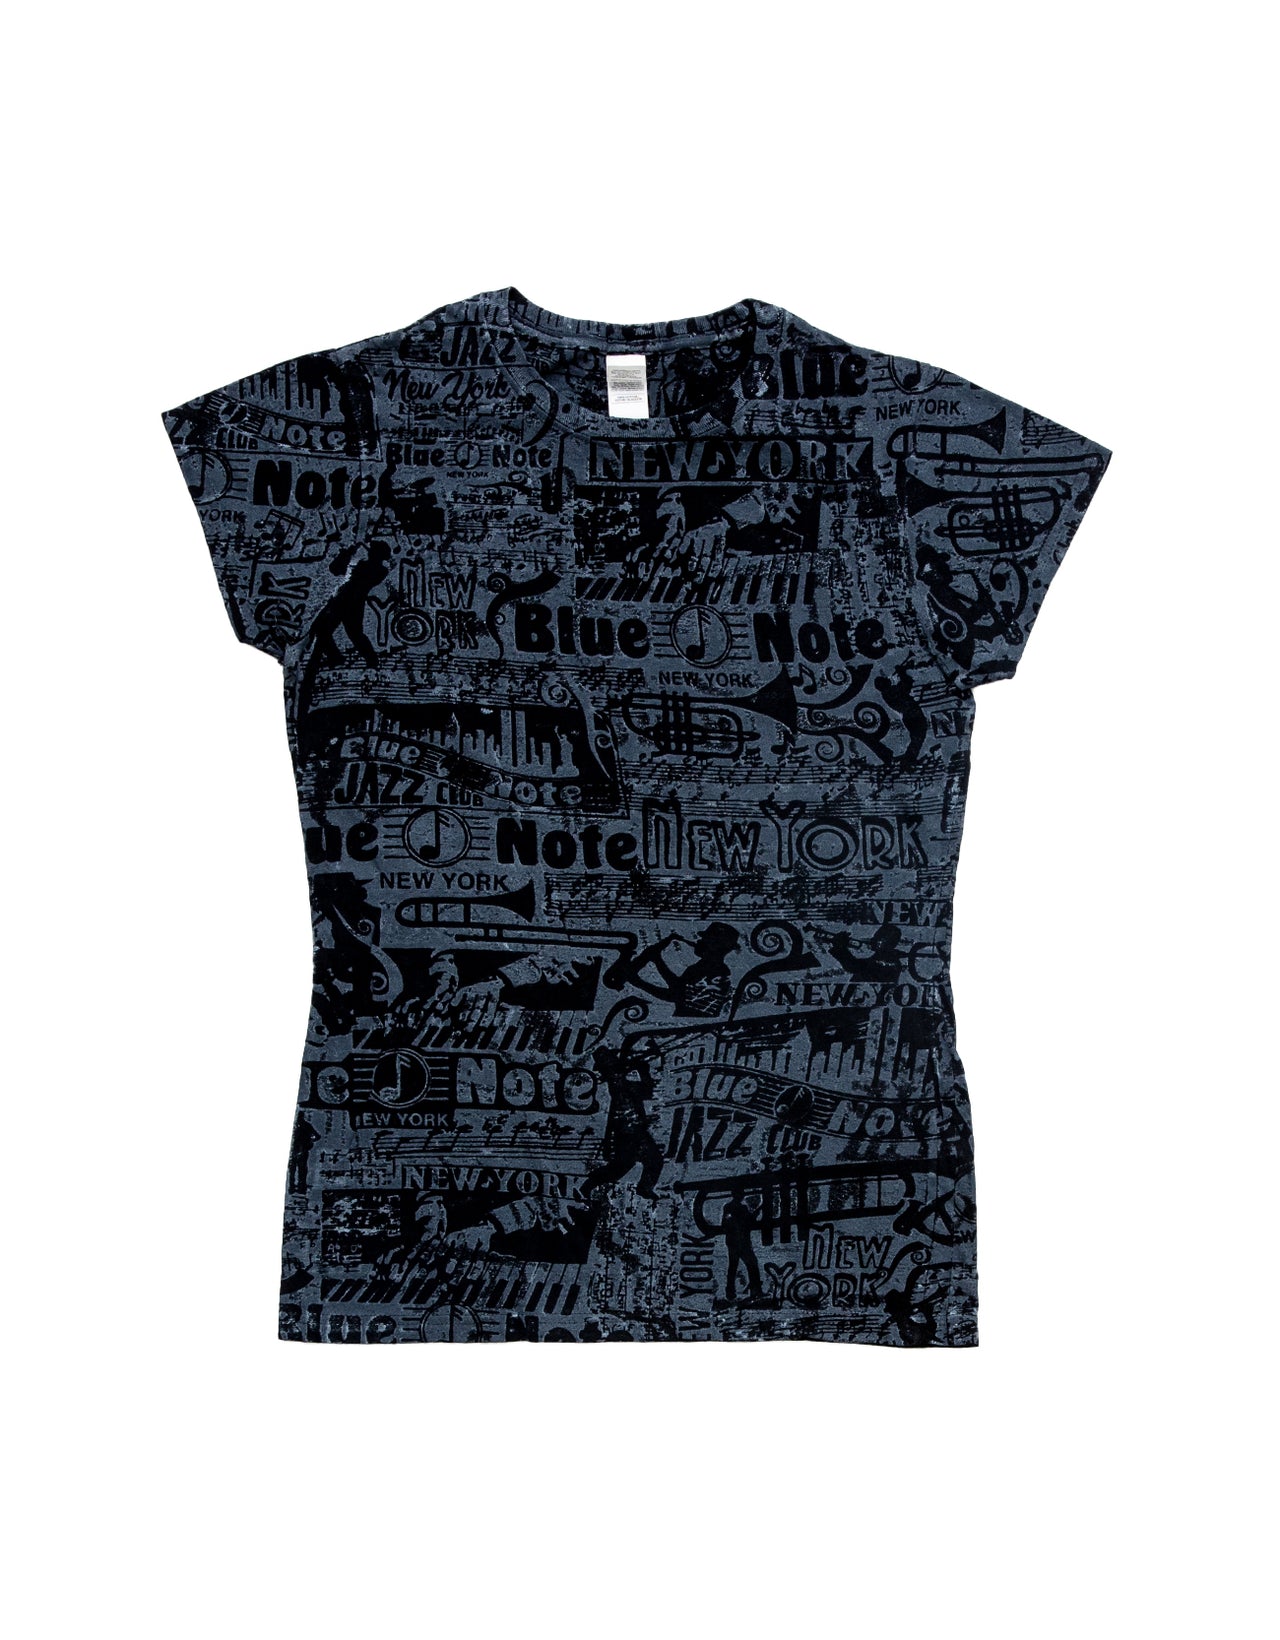 All-Over Blue Note NY | Women's Tee | Black